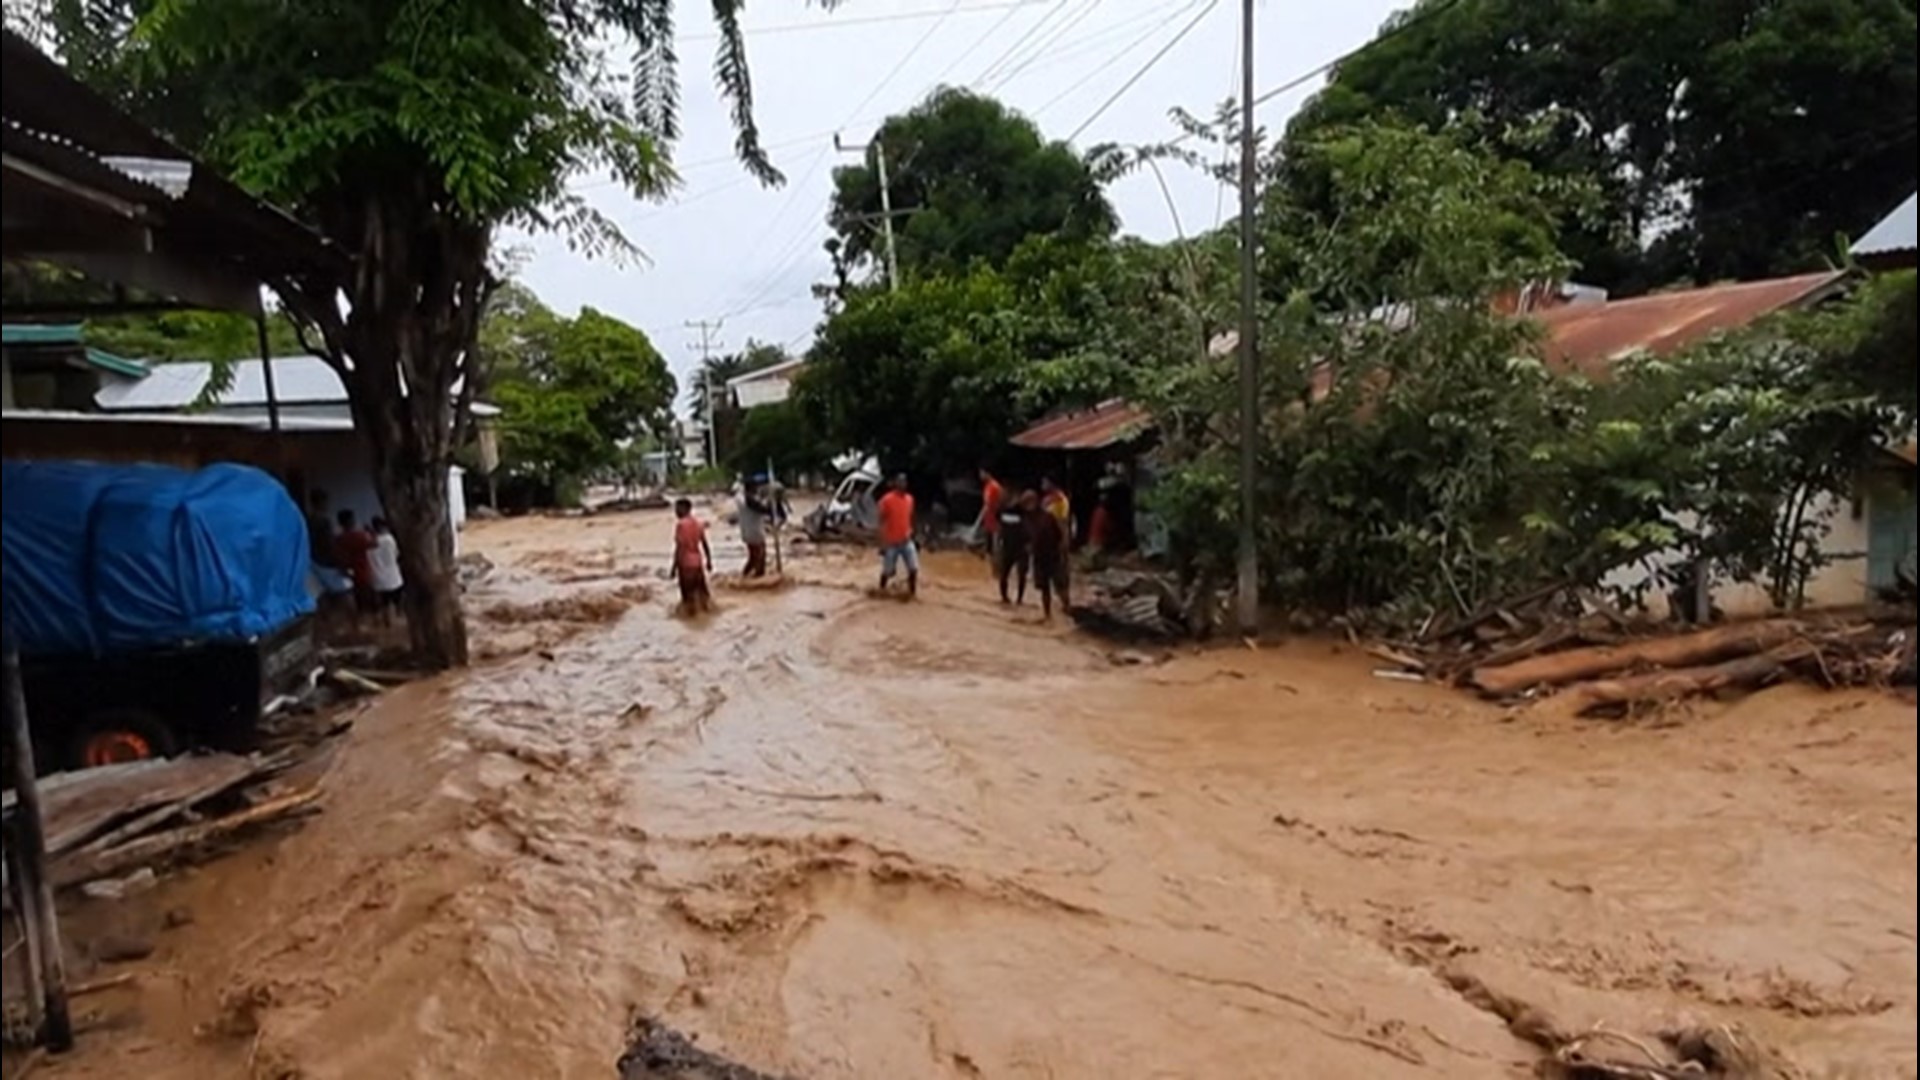 More than 100 people were killed in Indonesia and Timor-Leste when torrential rain led to devastating flooding and landslides, submerging villages in mud.